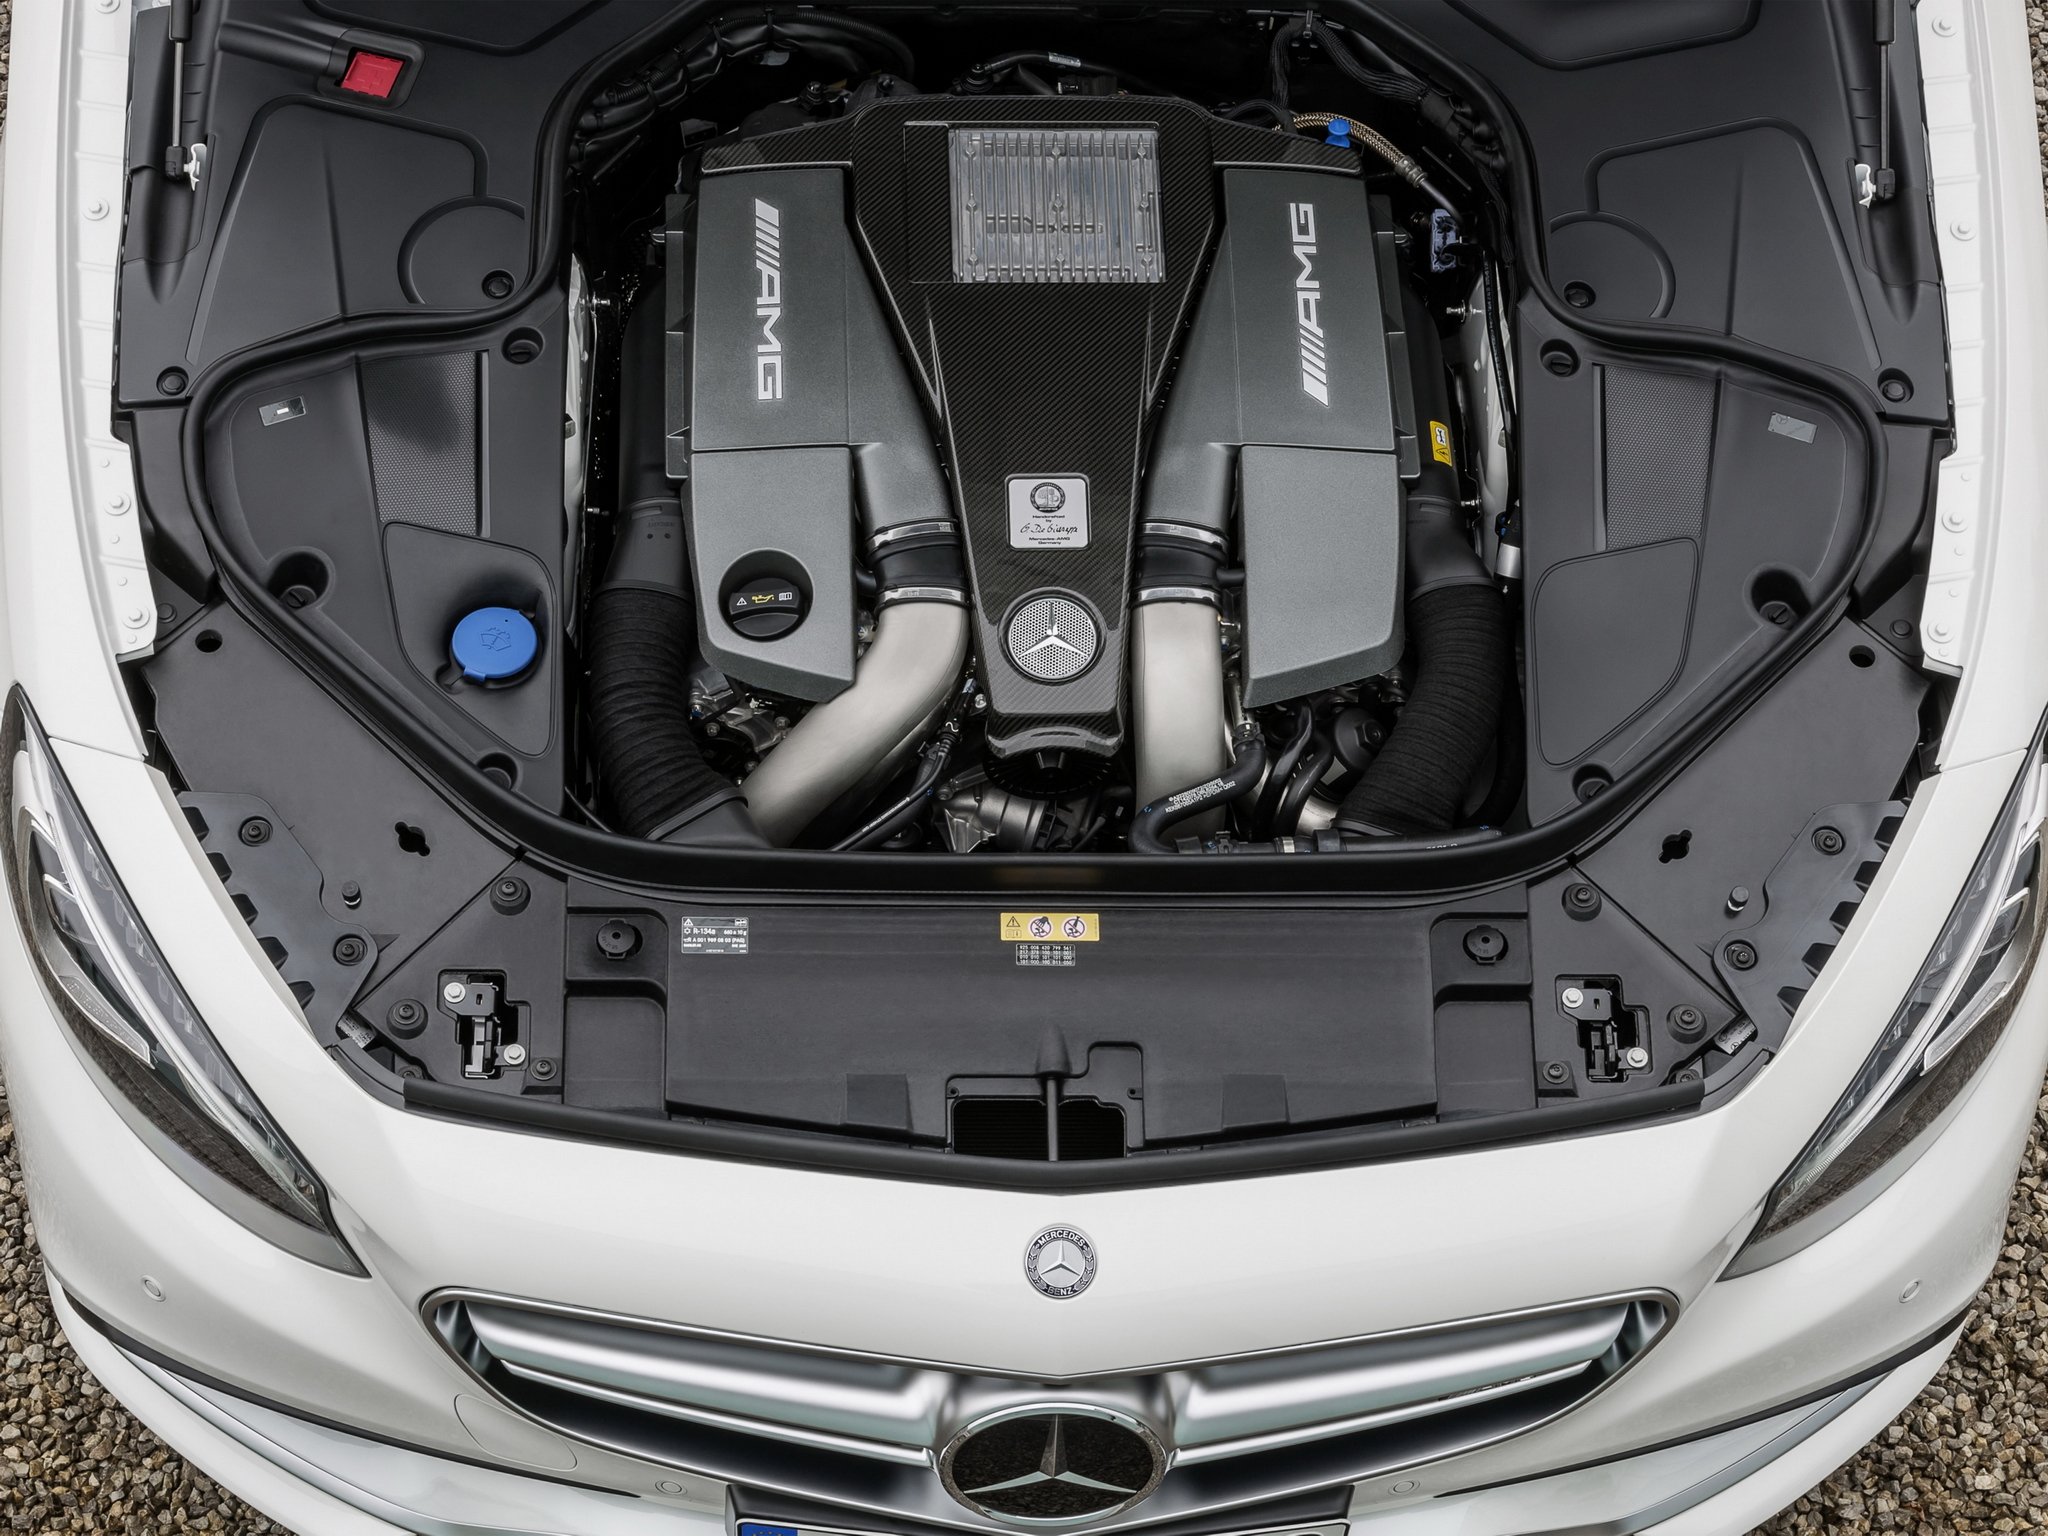 2014, Mercedes, Benz, S63, Amg, Coupe,  c217 , Engine Wallpaper